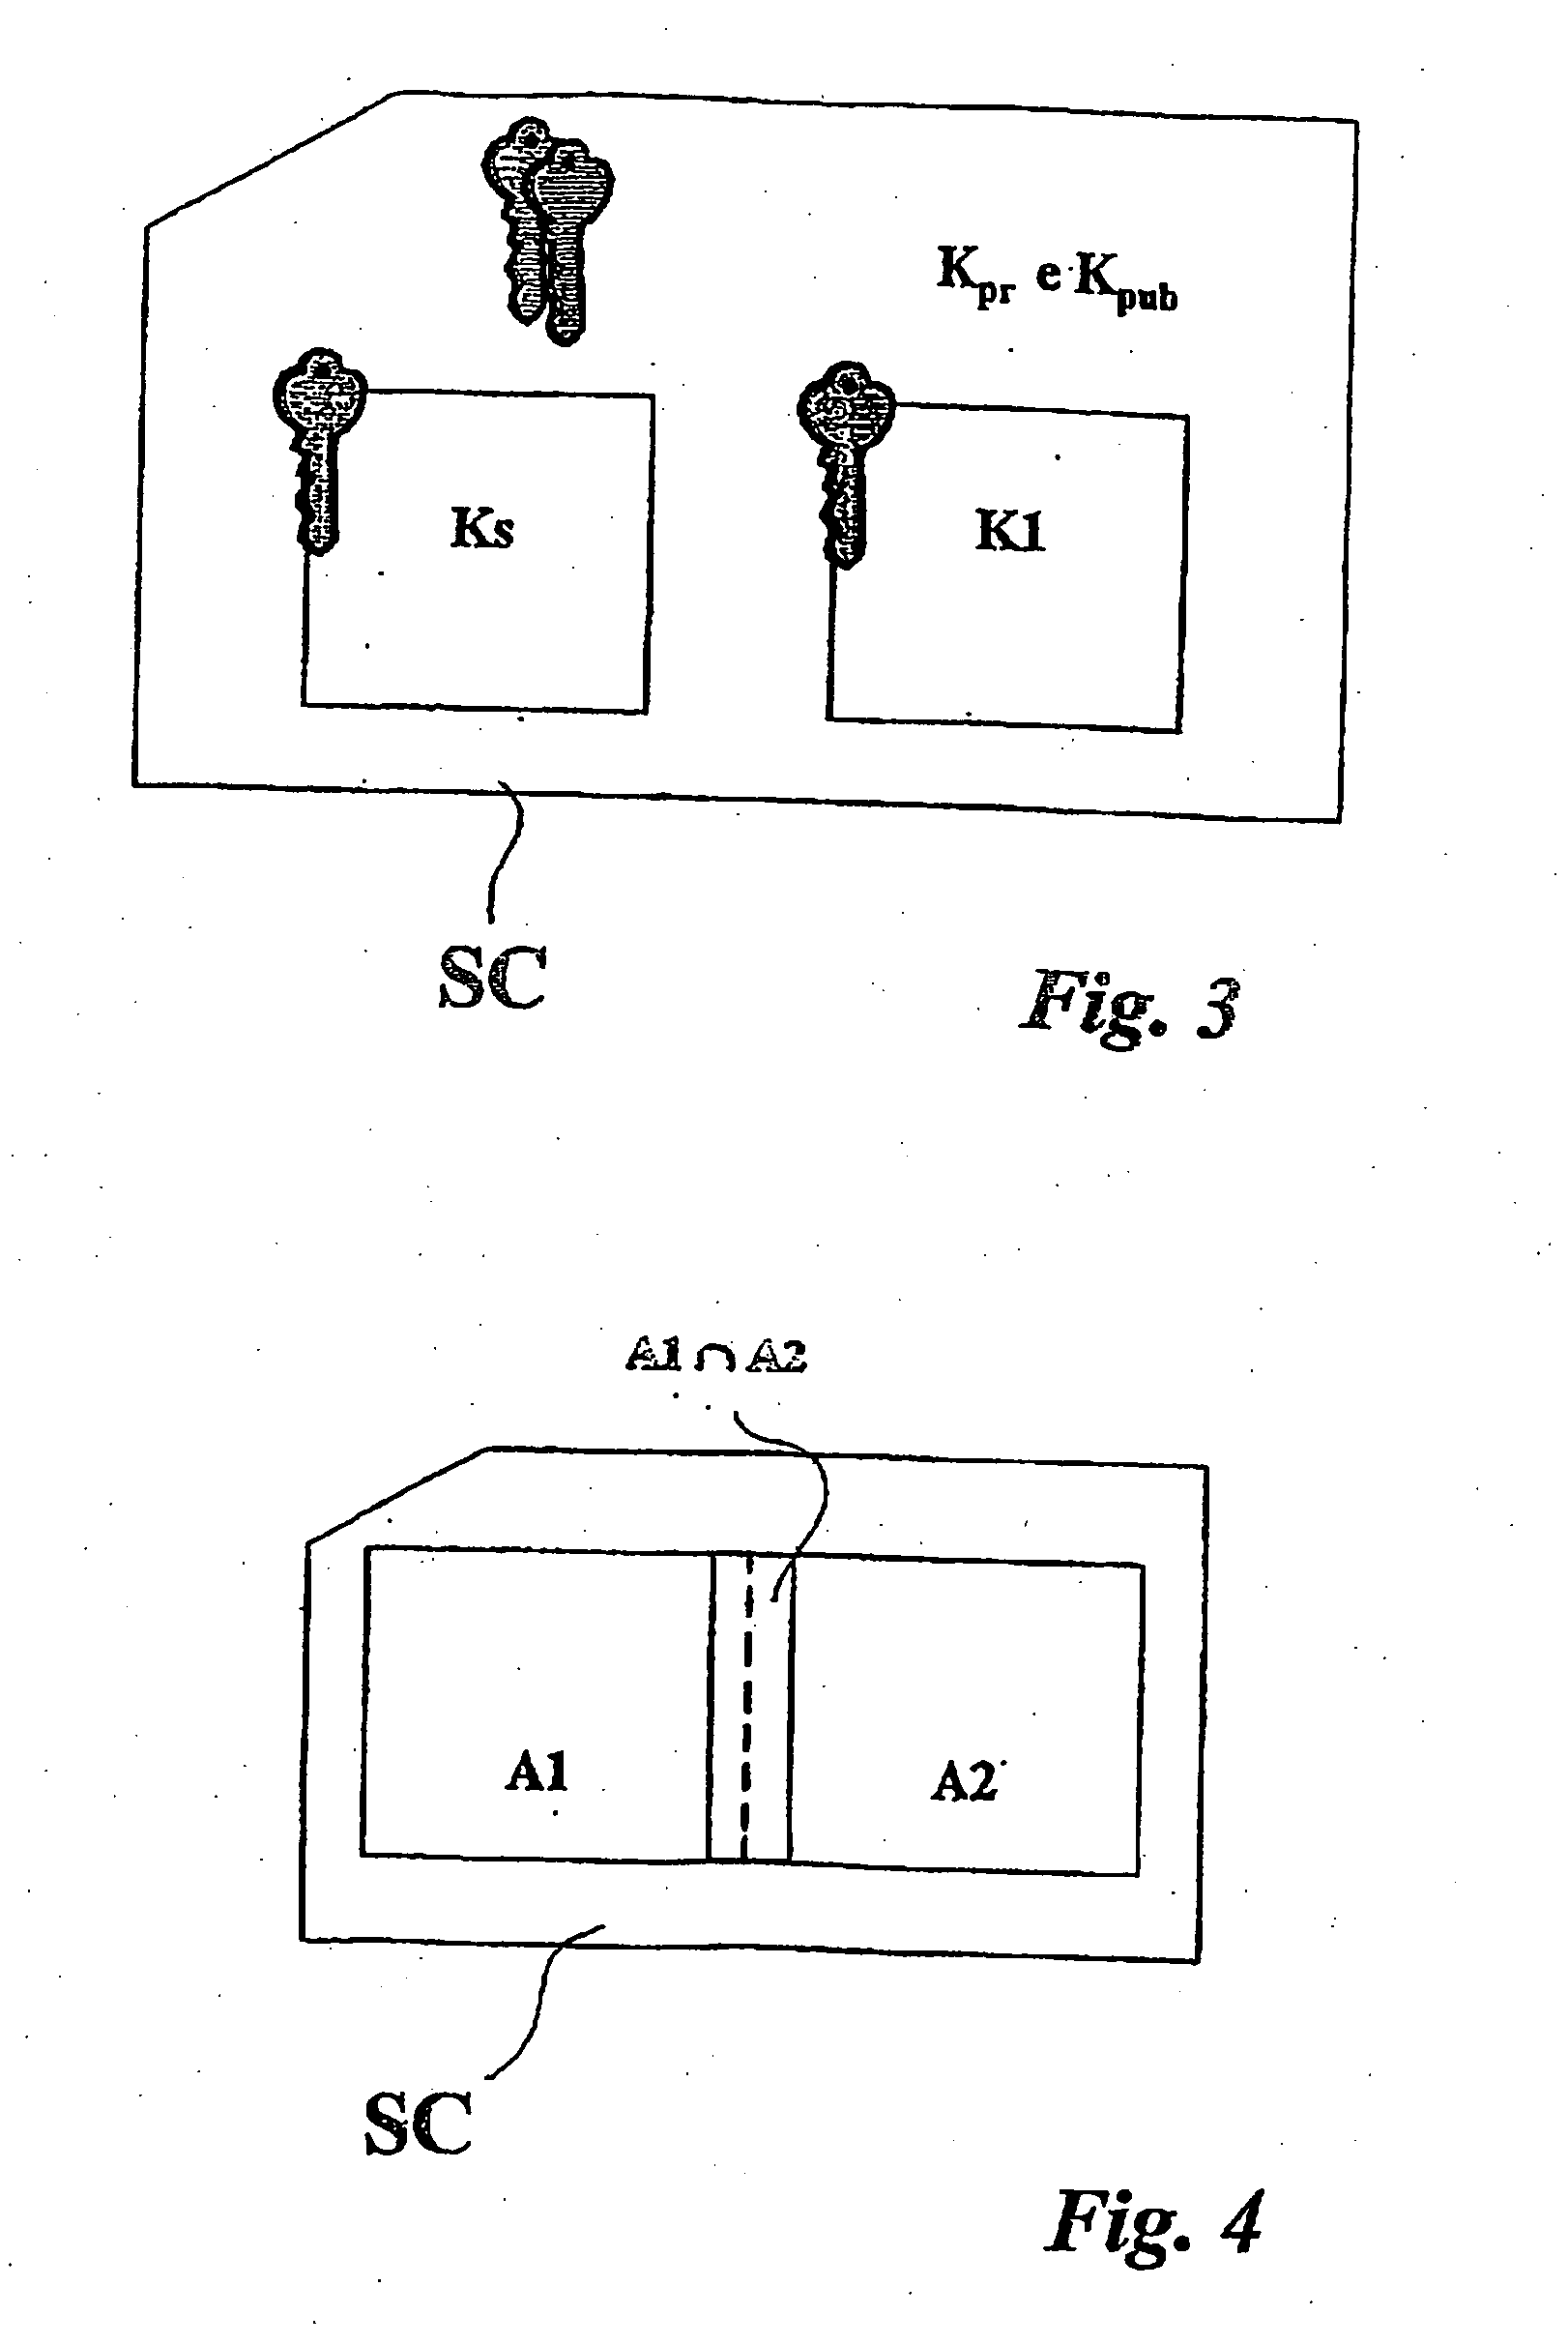 Method and system for managing network access device using a smart card